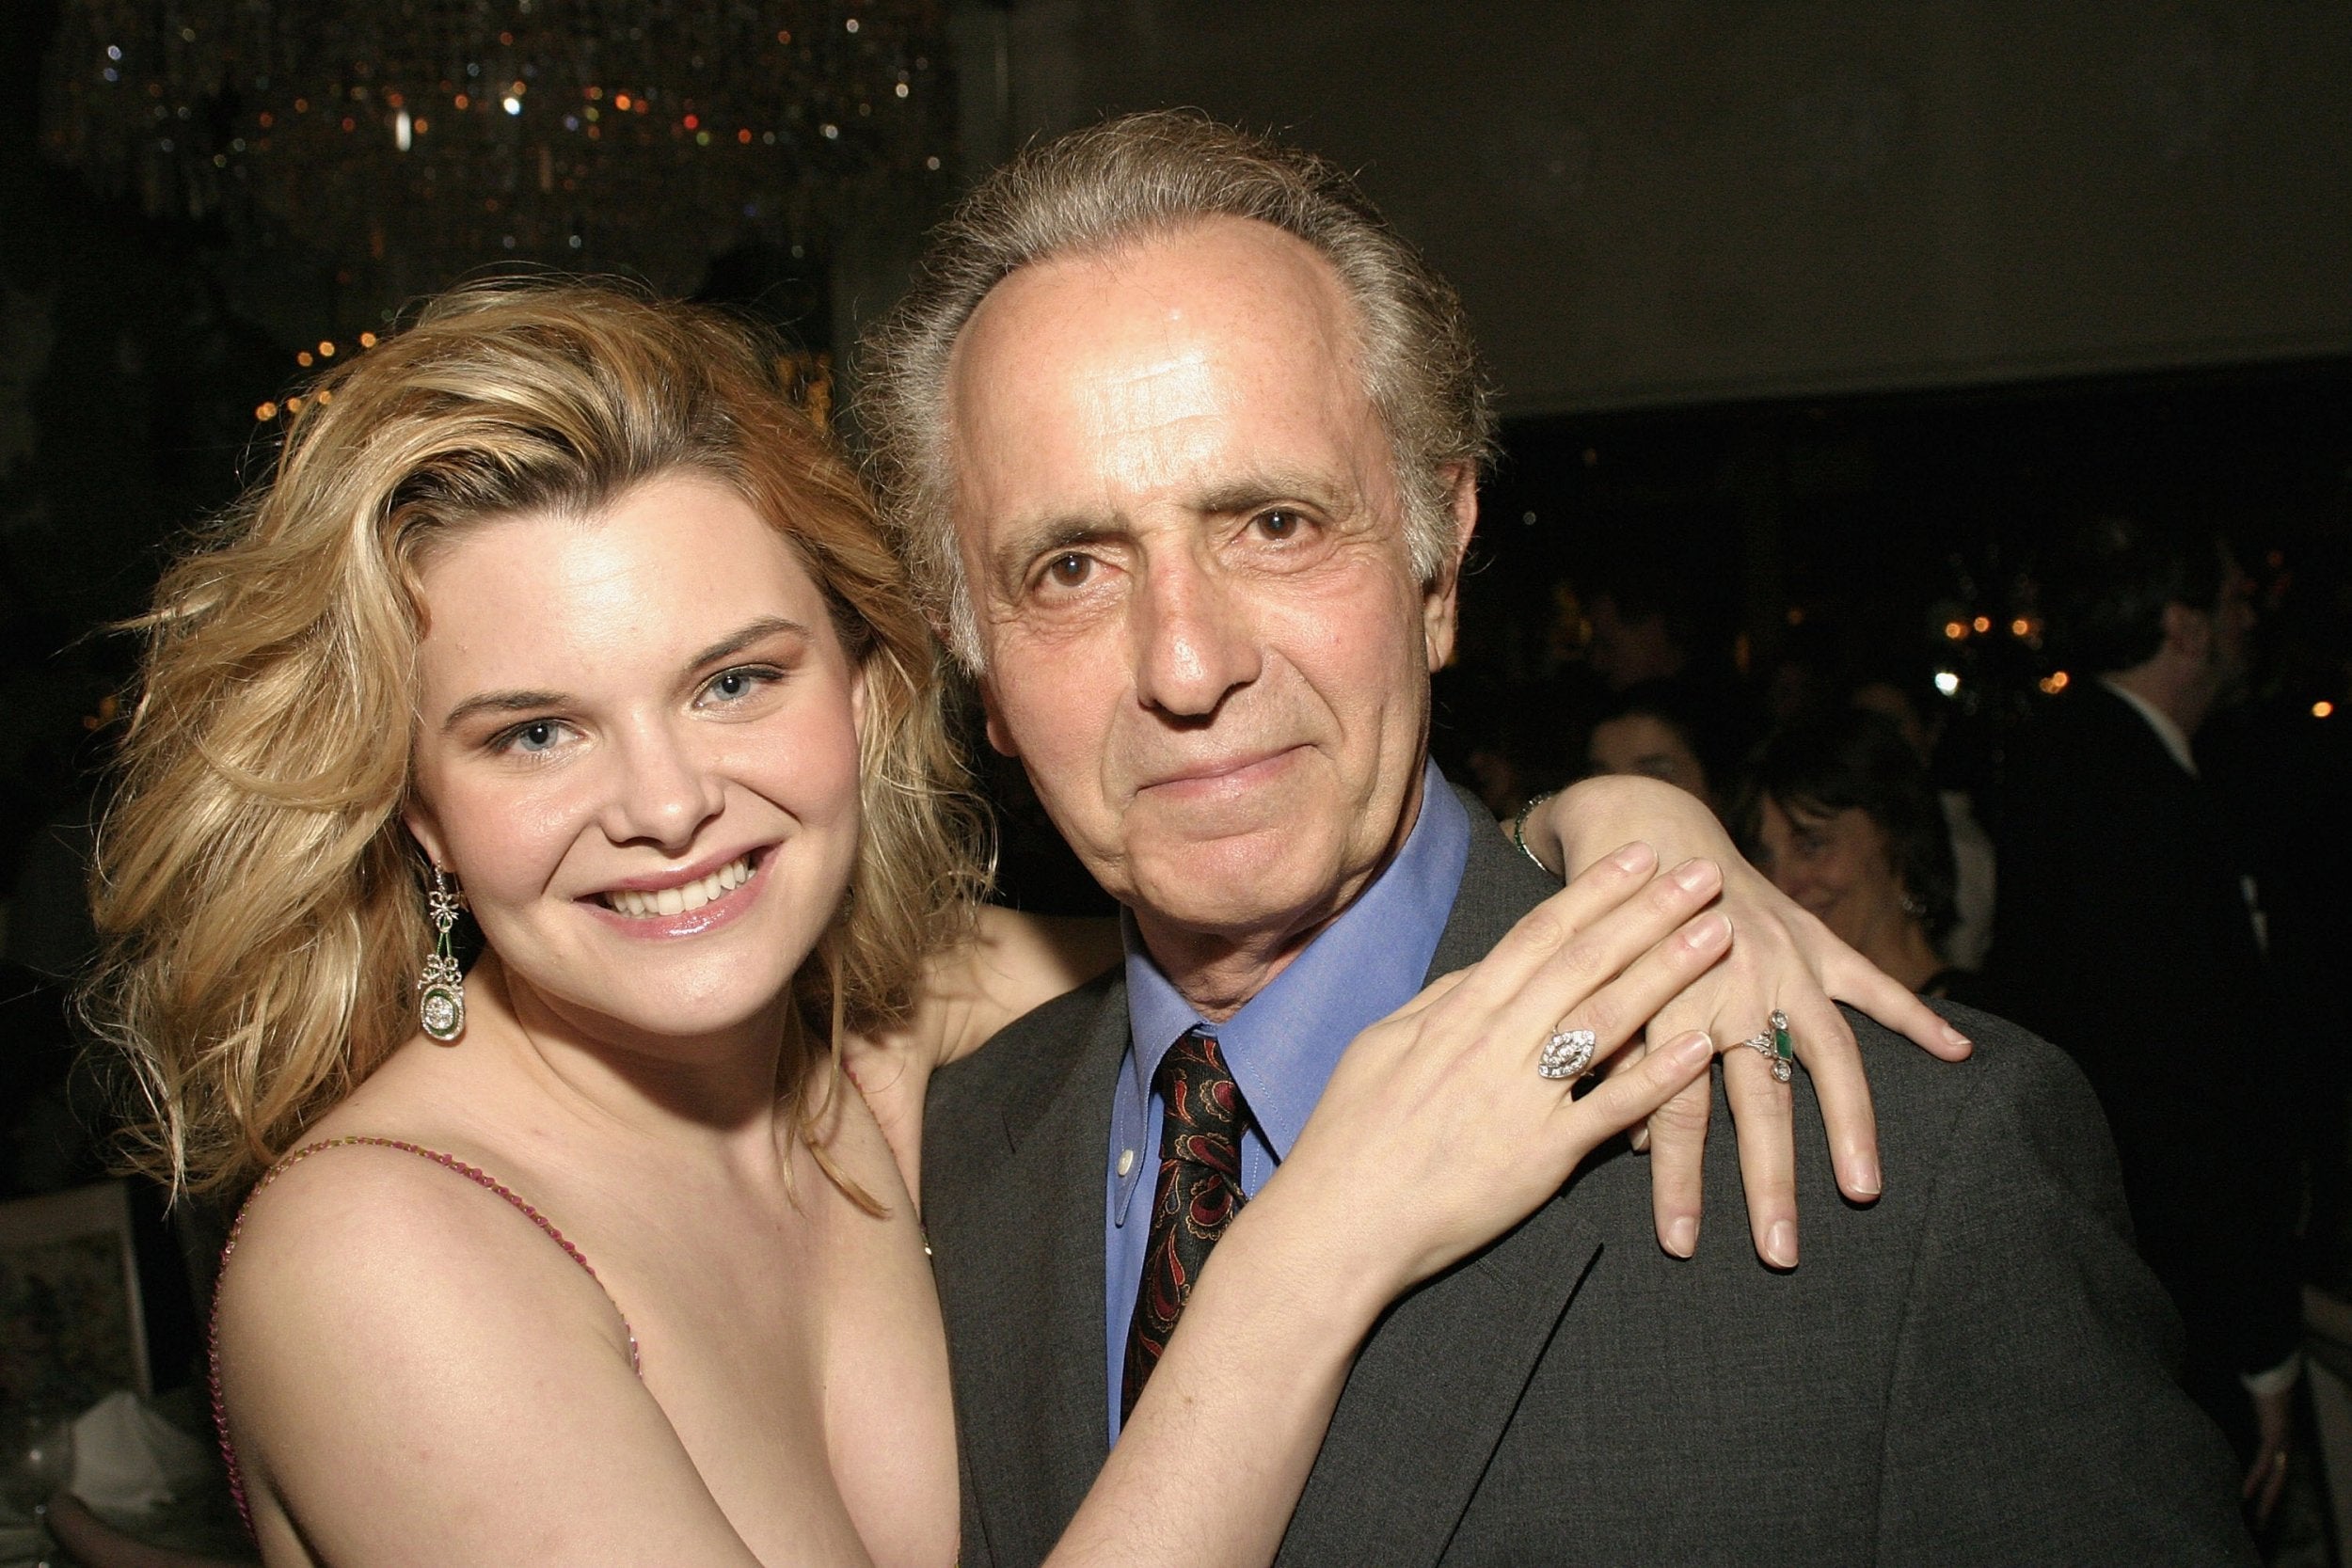 Medoff with actress Heather Tom in 2004 (Getty)